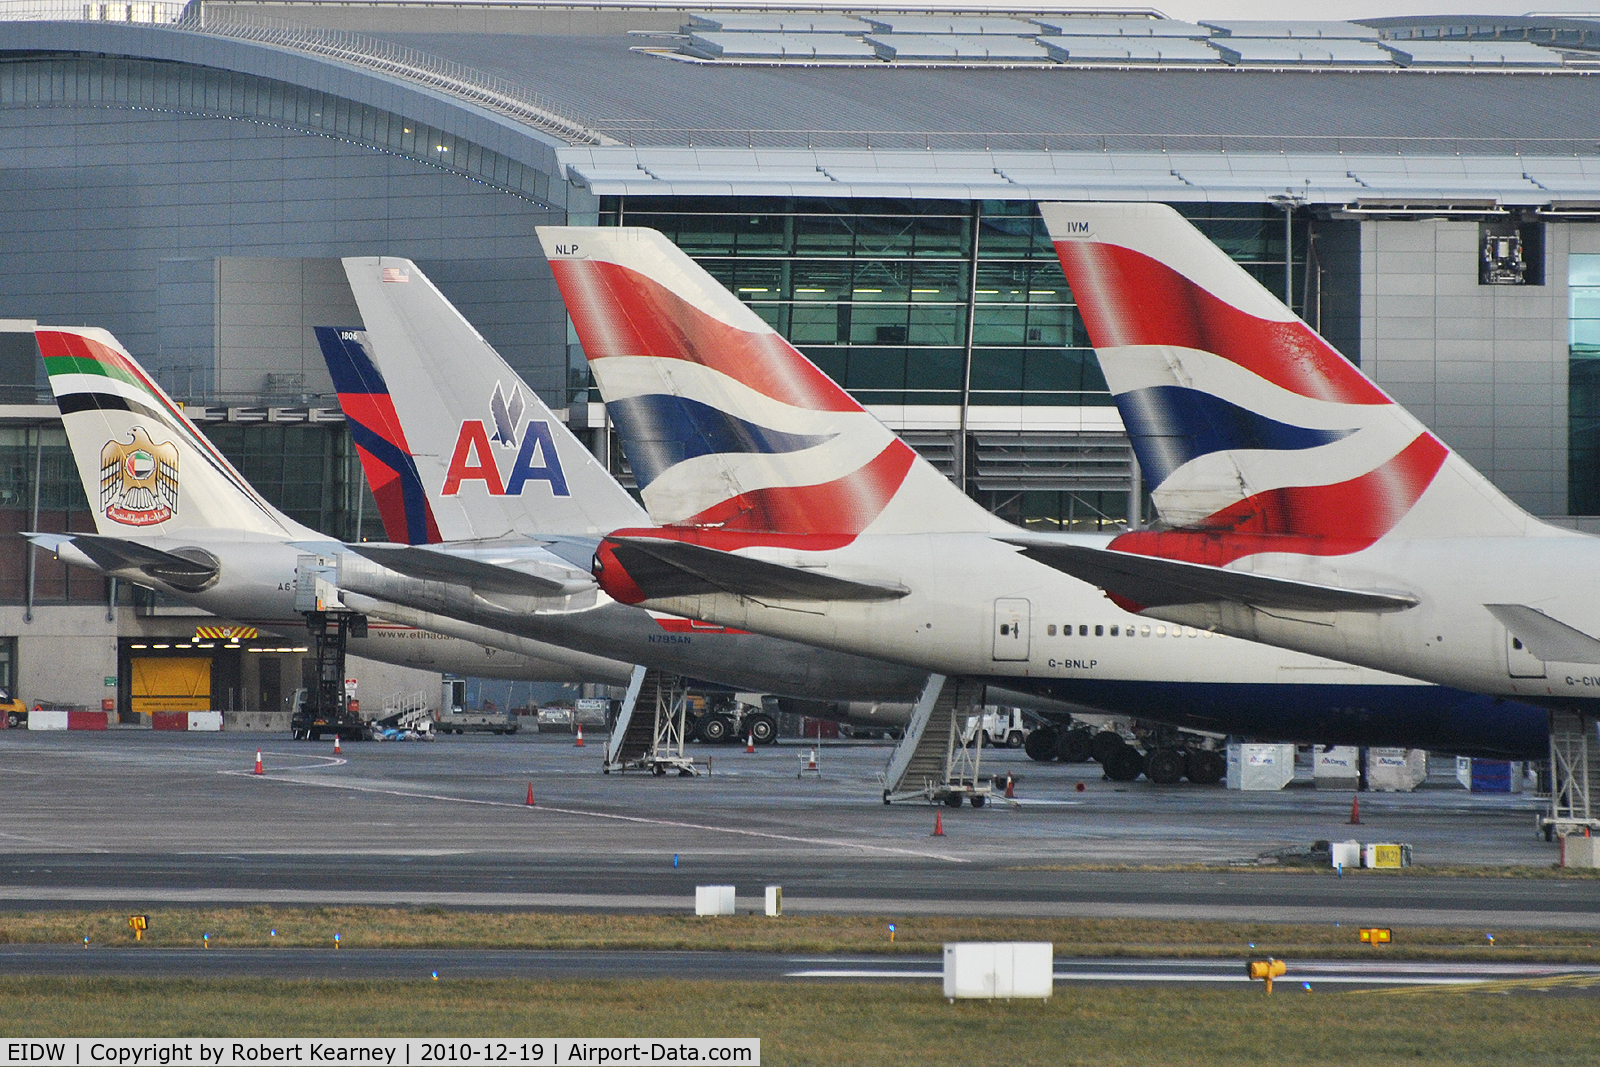 Dublin International Airport, Dublin Ireland (EIDW) - Some of the tails in EIDW due to weather in LHR